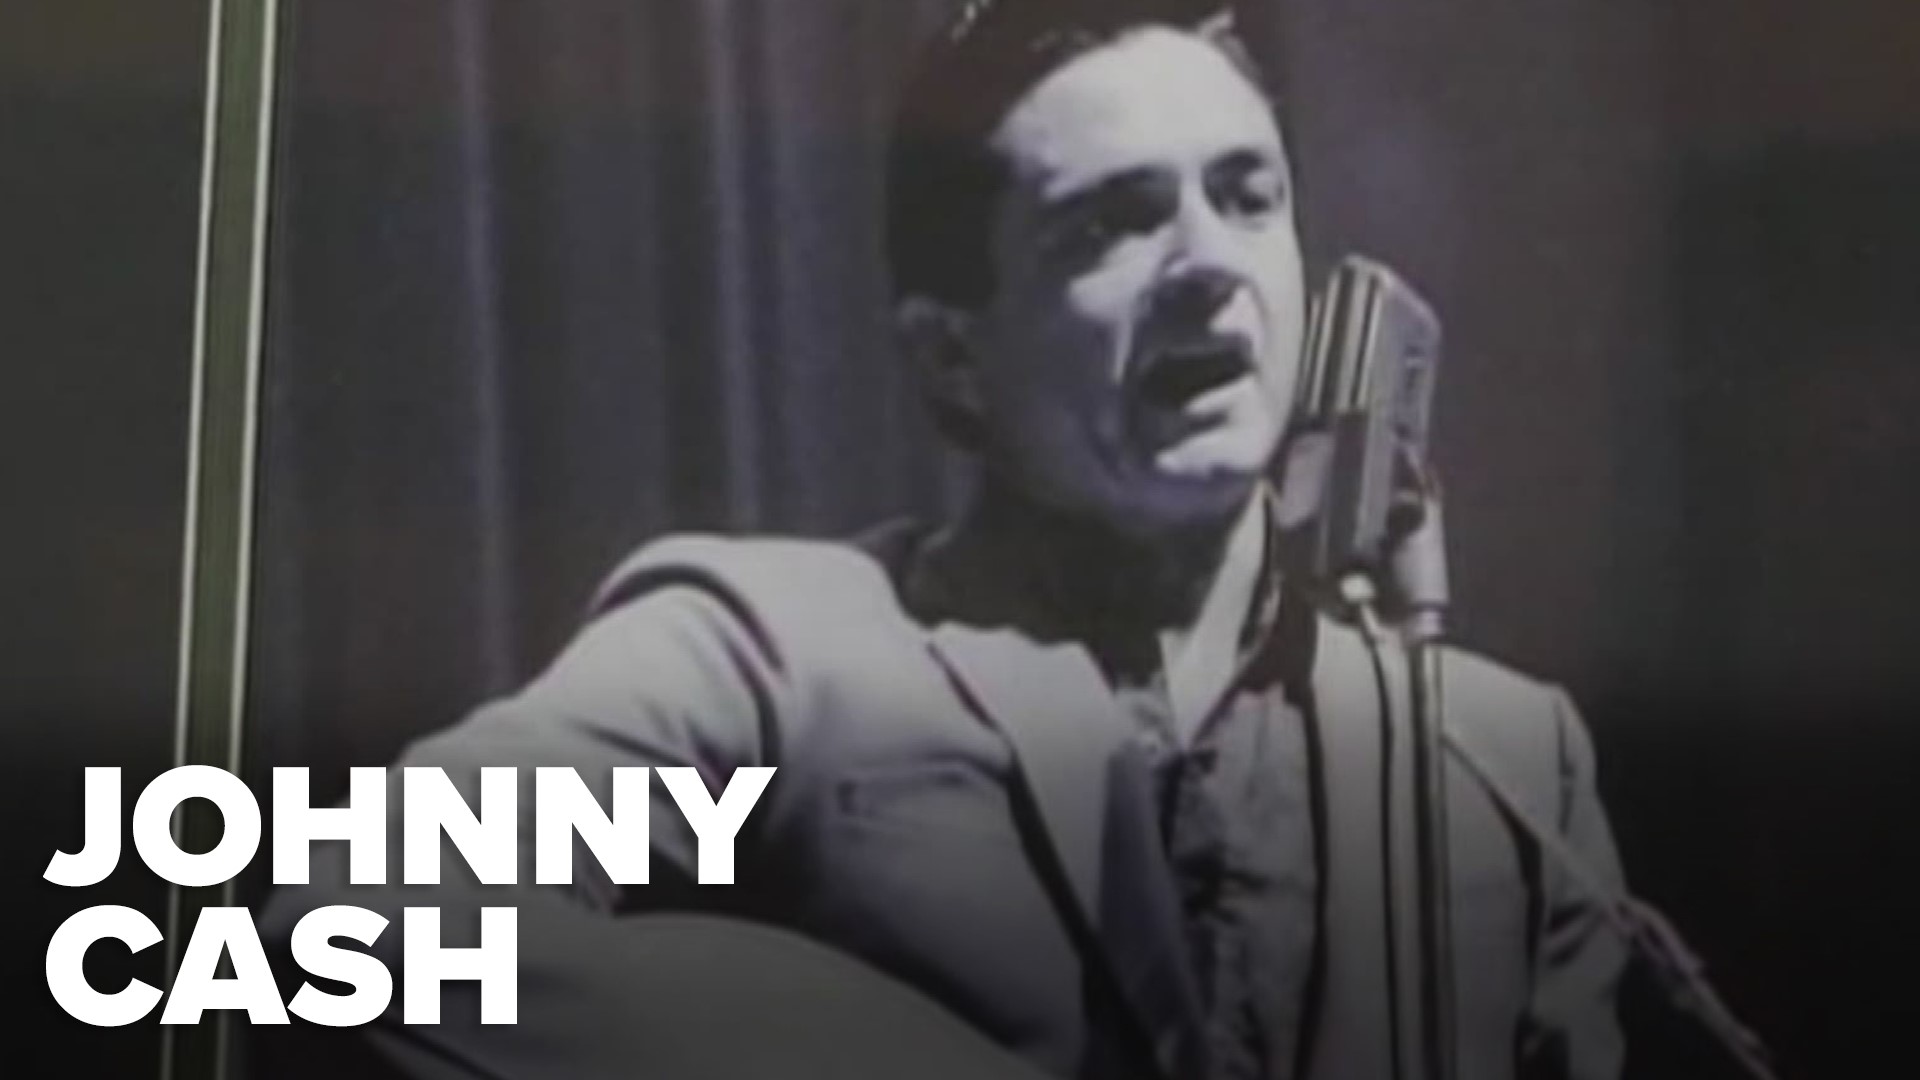 In this archive collection, we look back at Johnny Cash's boyhood home and the new statue that will be erected in Washington D.C.